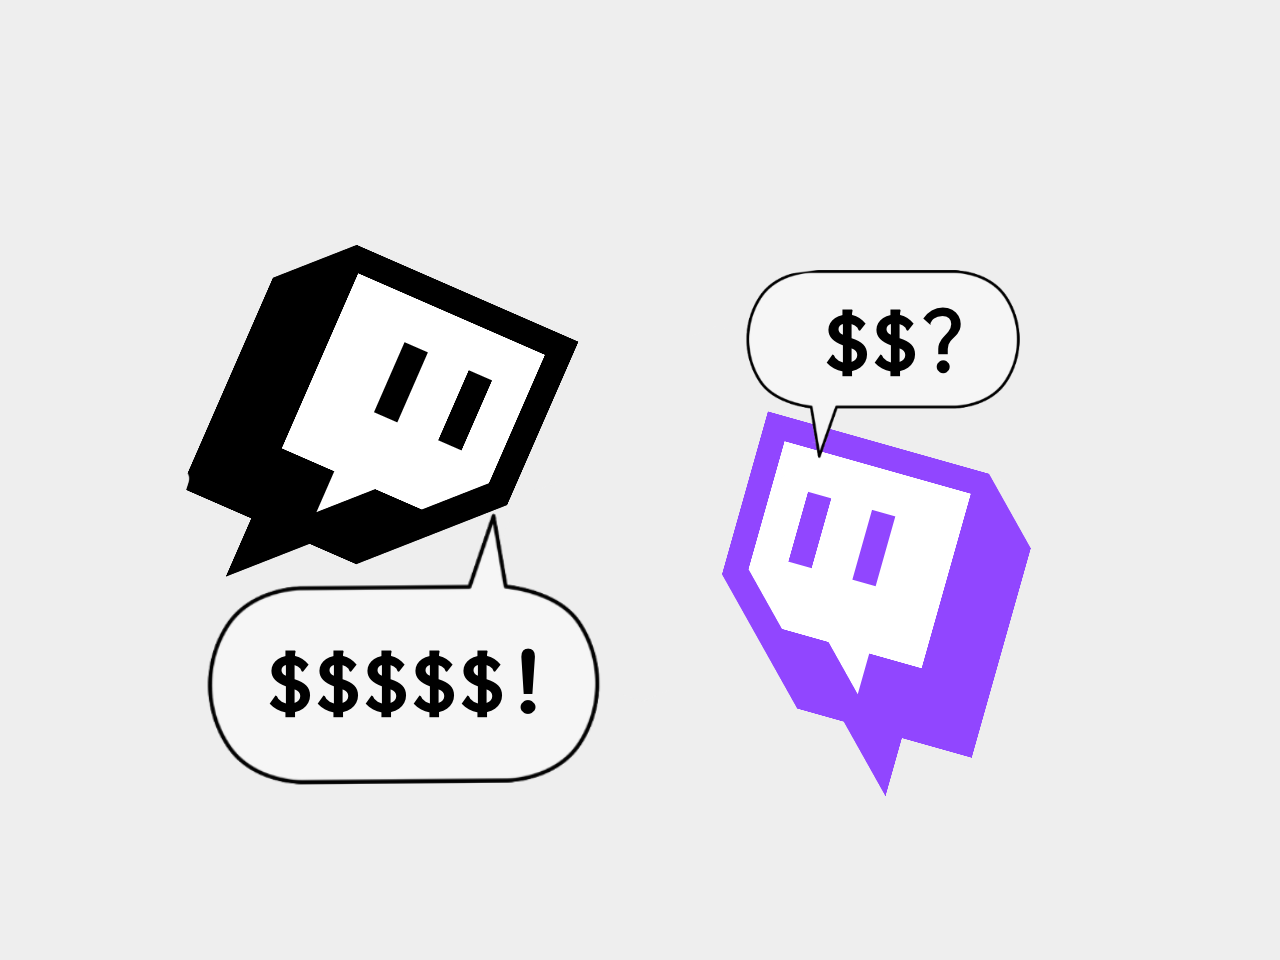 Twitch: leaked data indicates that Brazilian female streamers earn 40% less per follower than male streamers